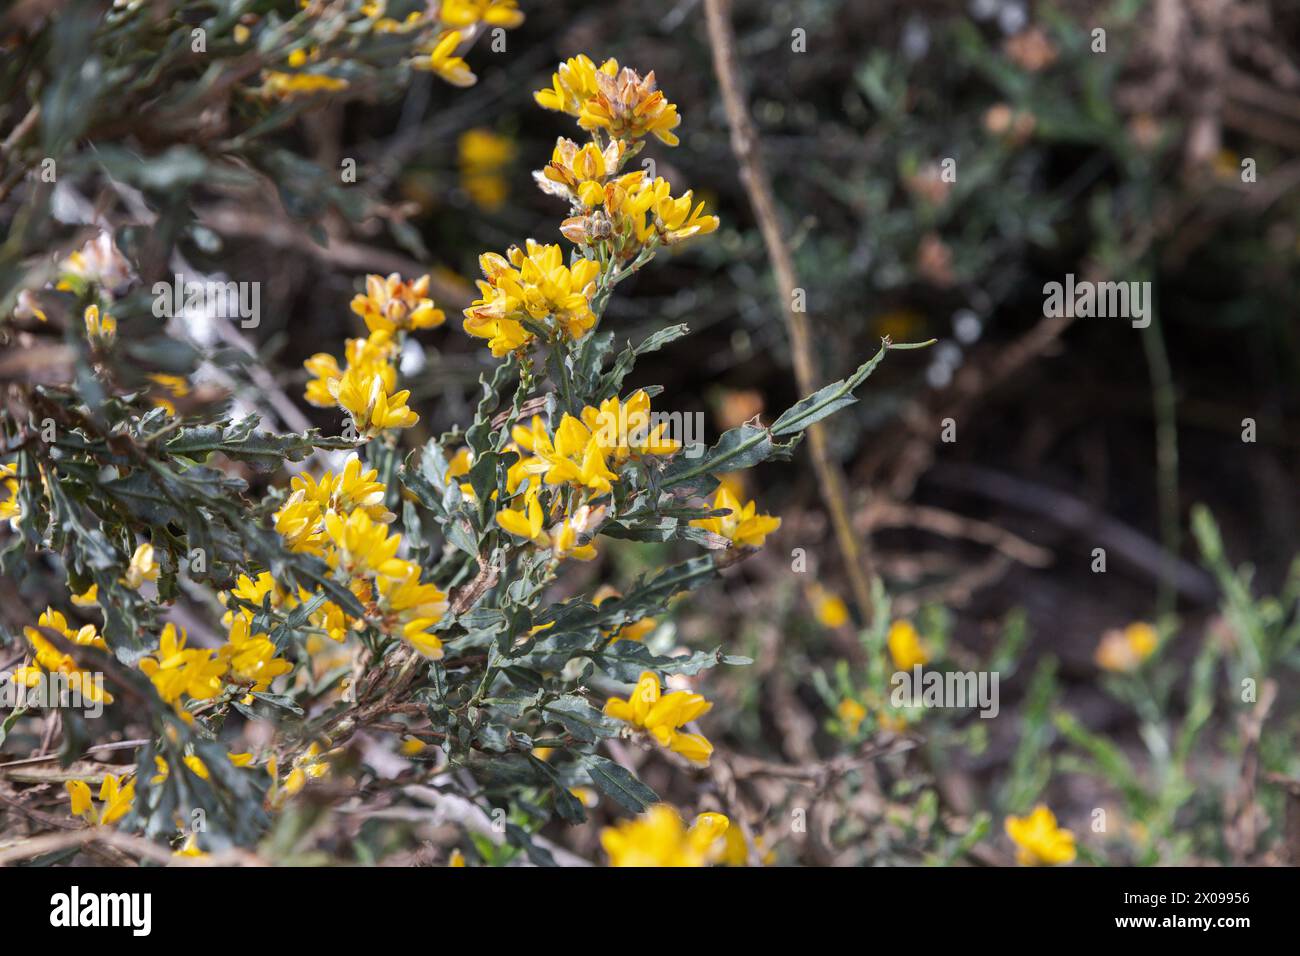 Baccharis trimera or genista tridentata, known as carqueija flower, spontaneous yellow flower widely found in the Iberian Peninsula from wastelands us Stock Photo